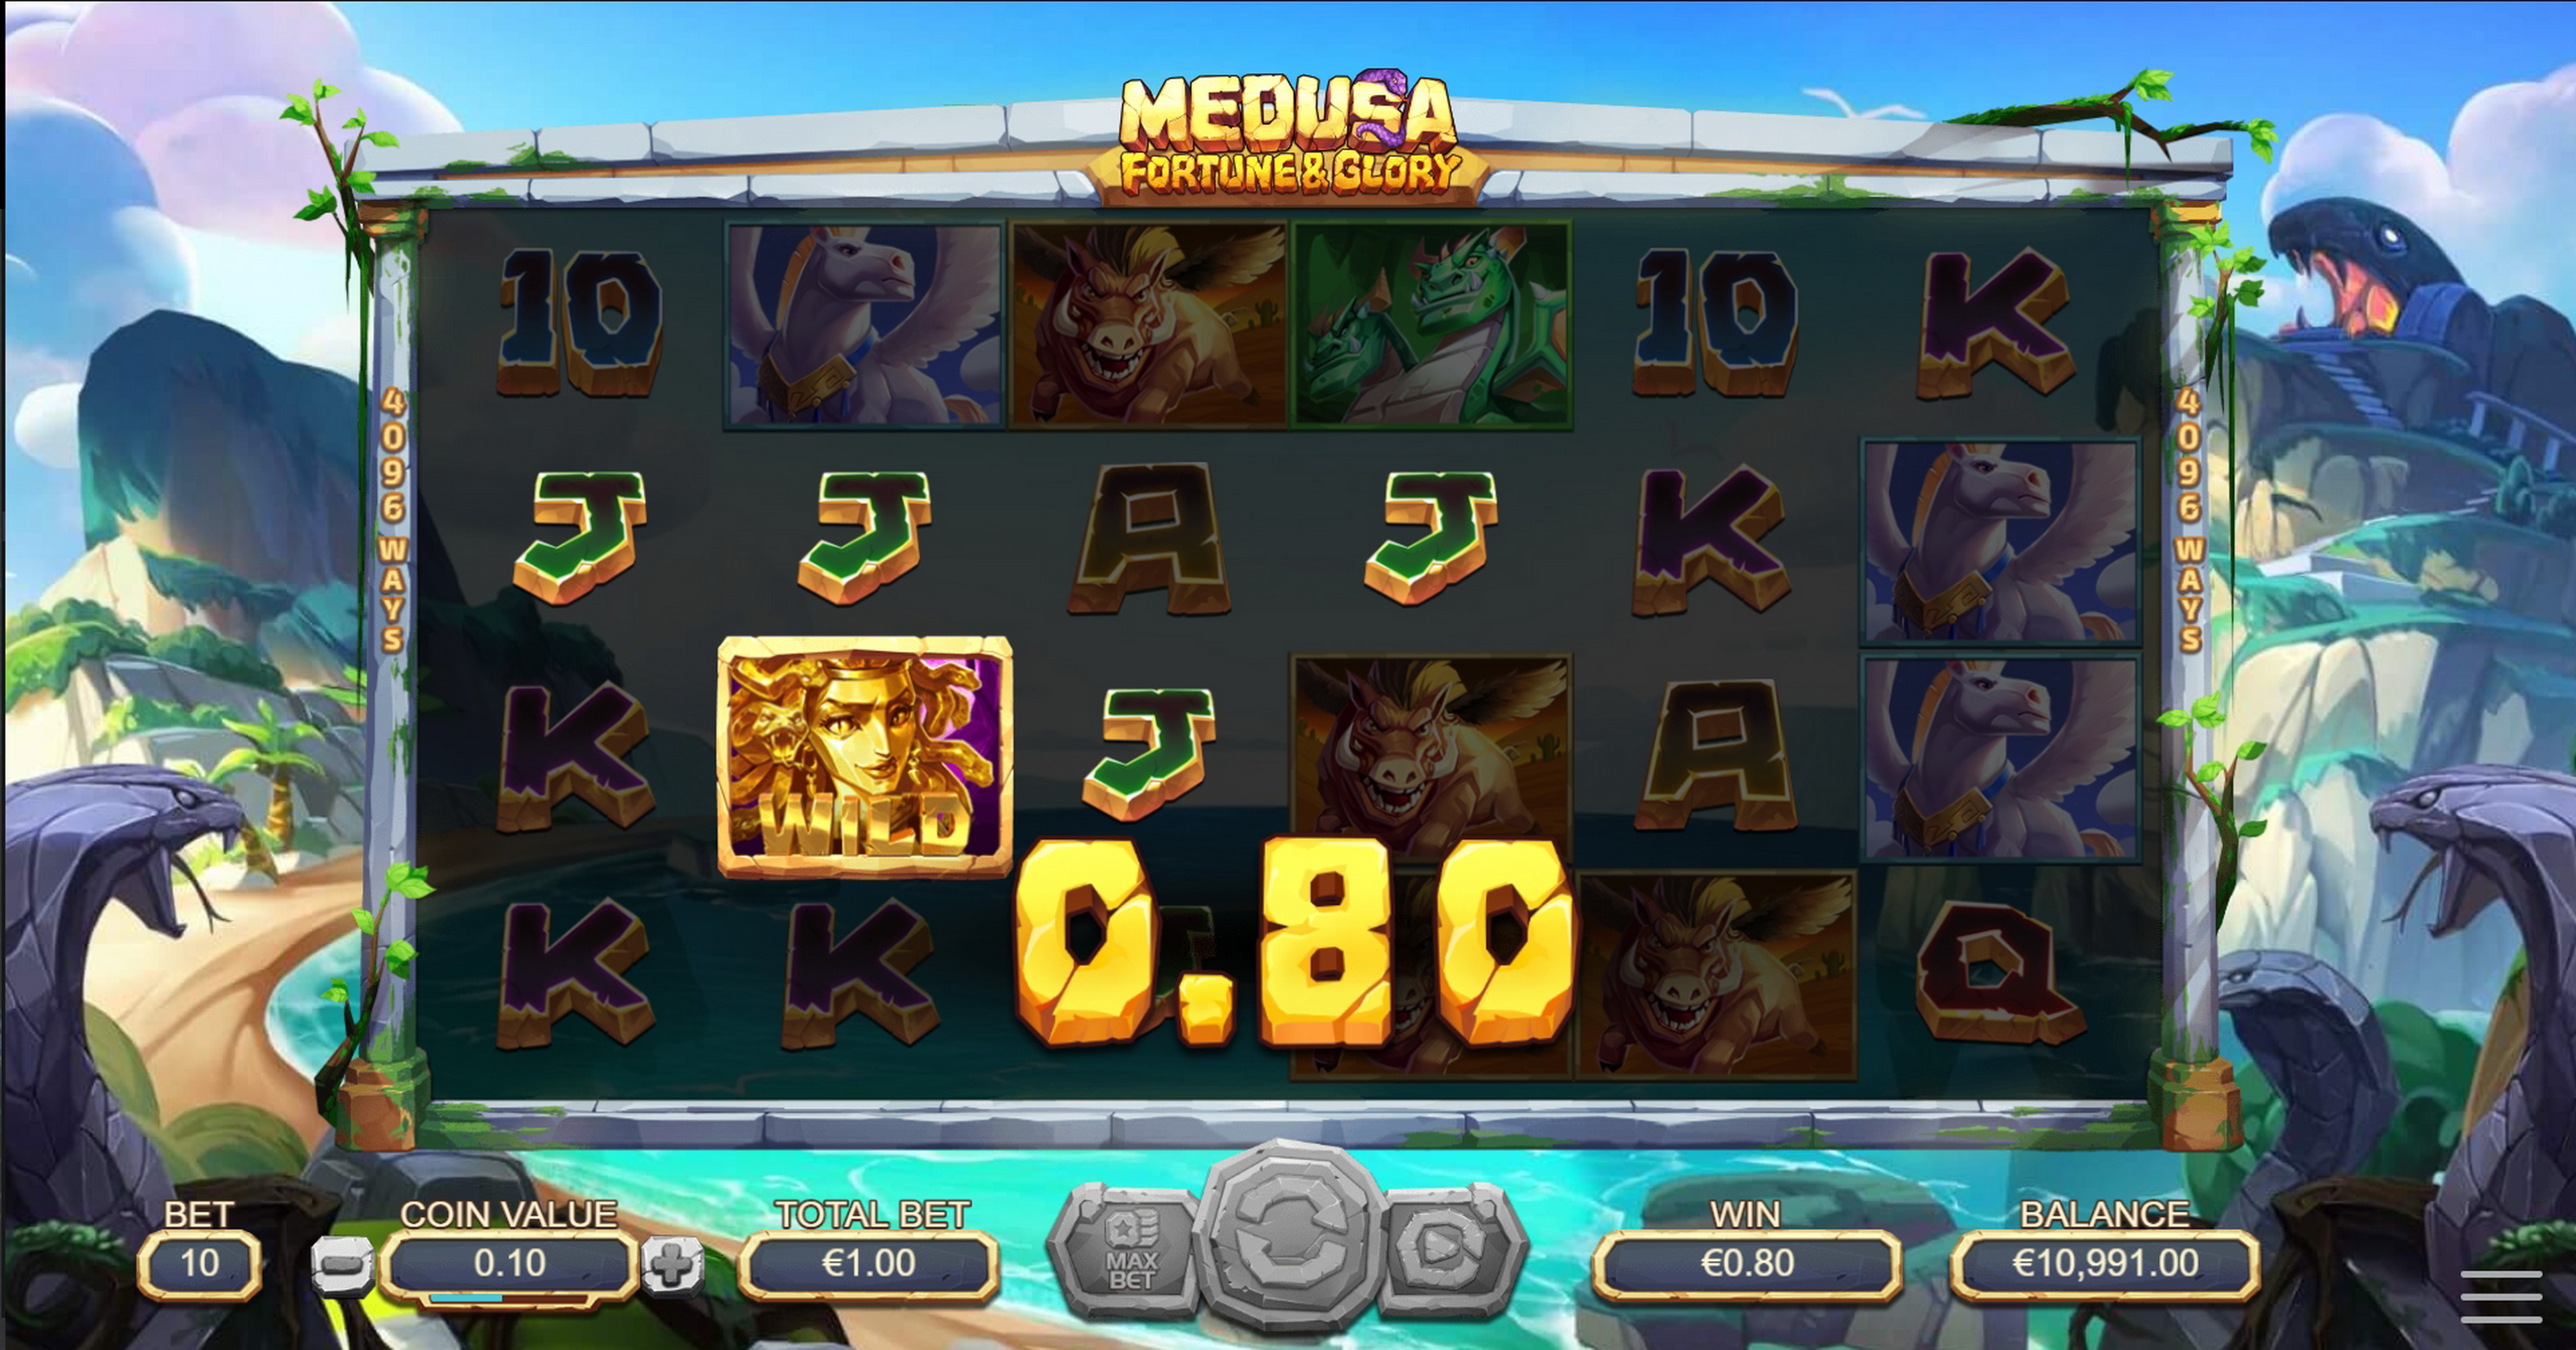 Win Money in Medusa: Fortune and Glory Free Slot Game by Dreamtech Gaming